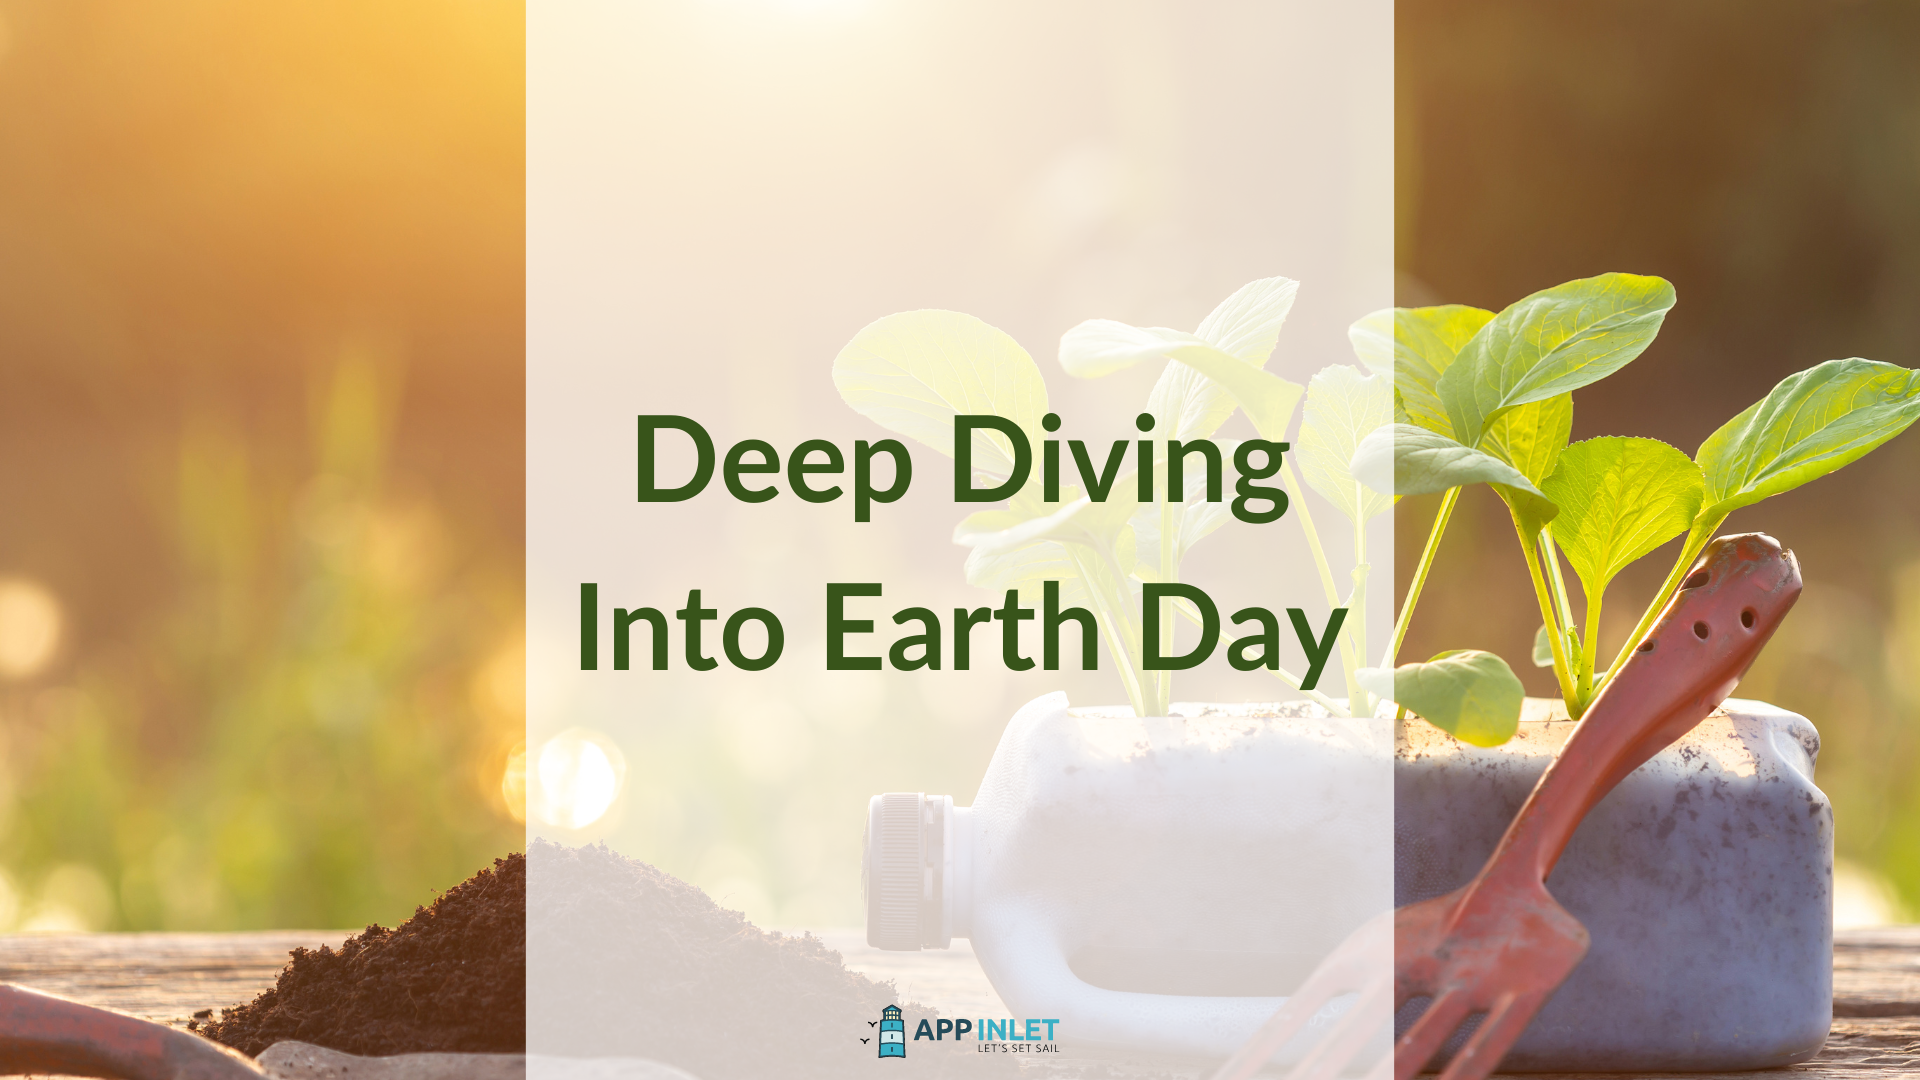 Deep Diving Into Earth Day: Plants Vs Plastic